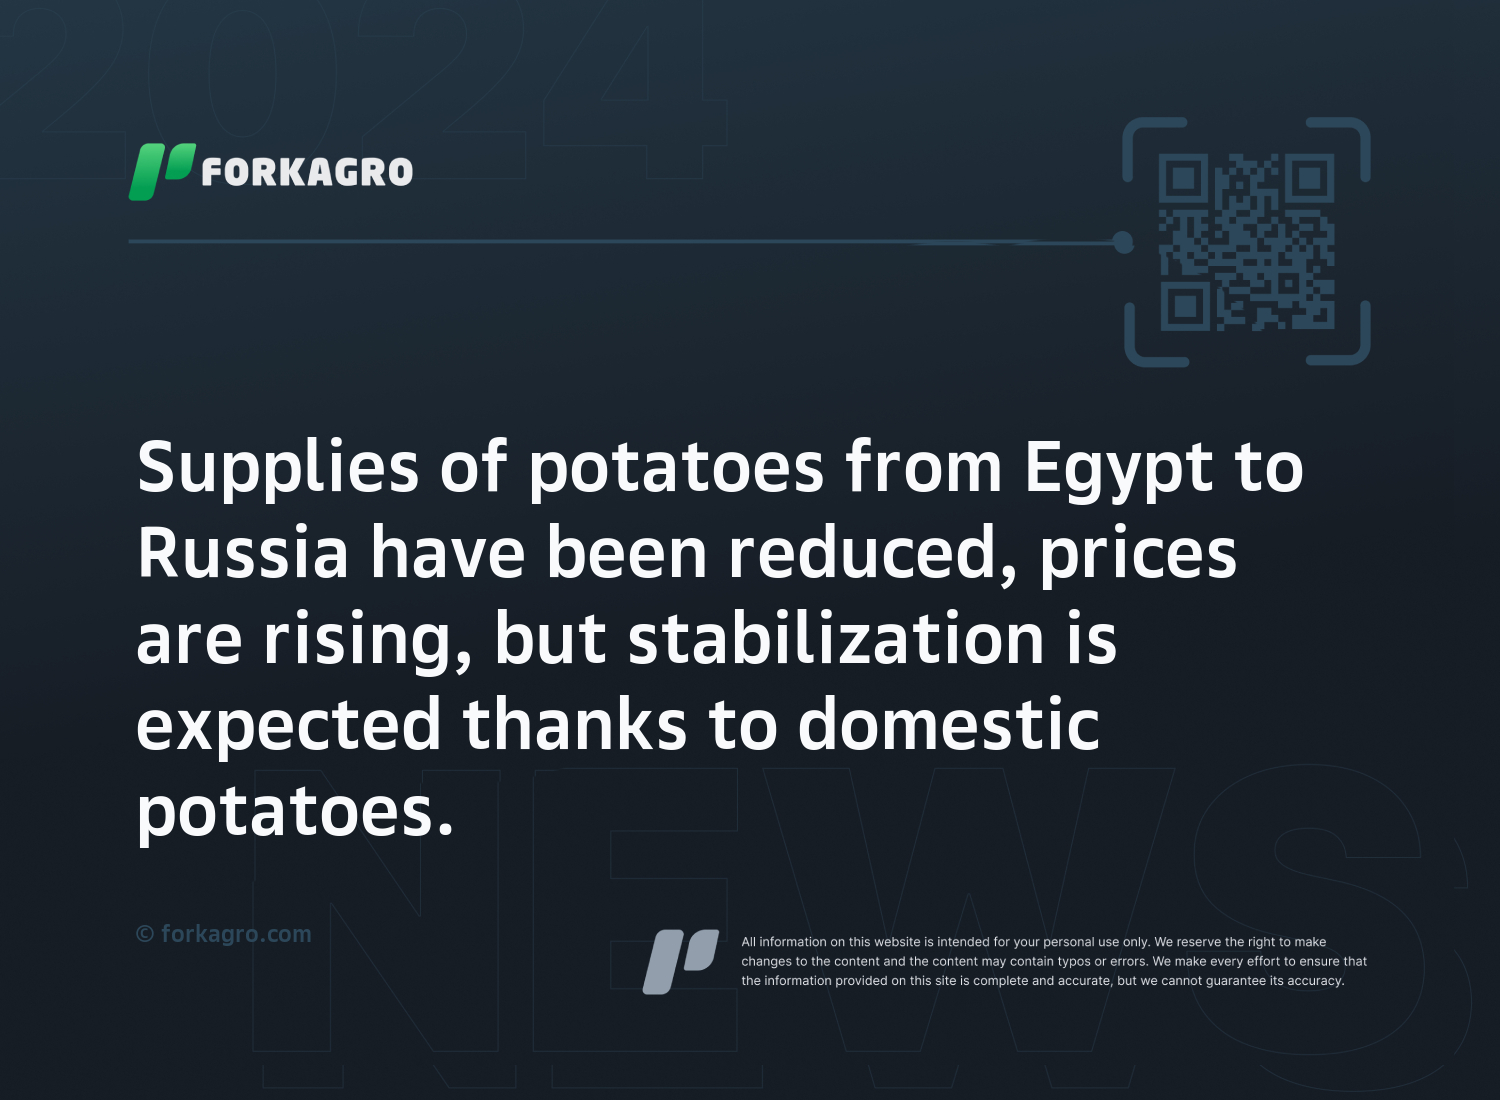 Supplies of potatoes from Egypt to Russia have been reduced, prices are rising, but stabilization is expected thanks to domestic potatoes.